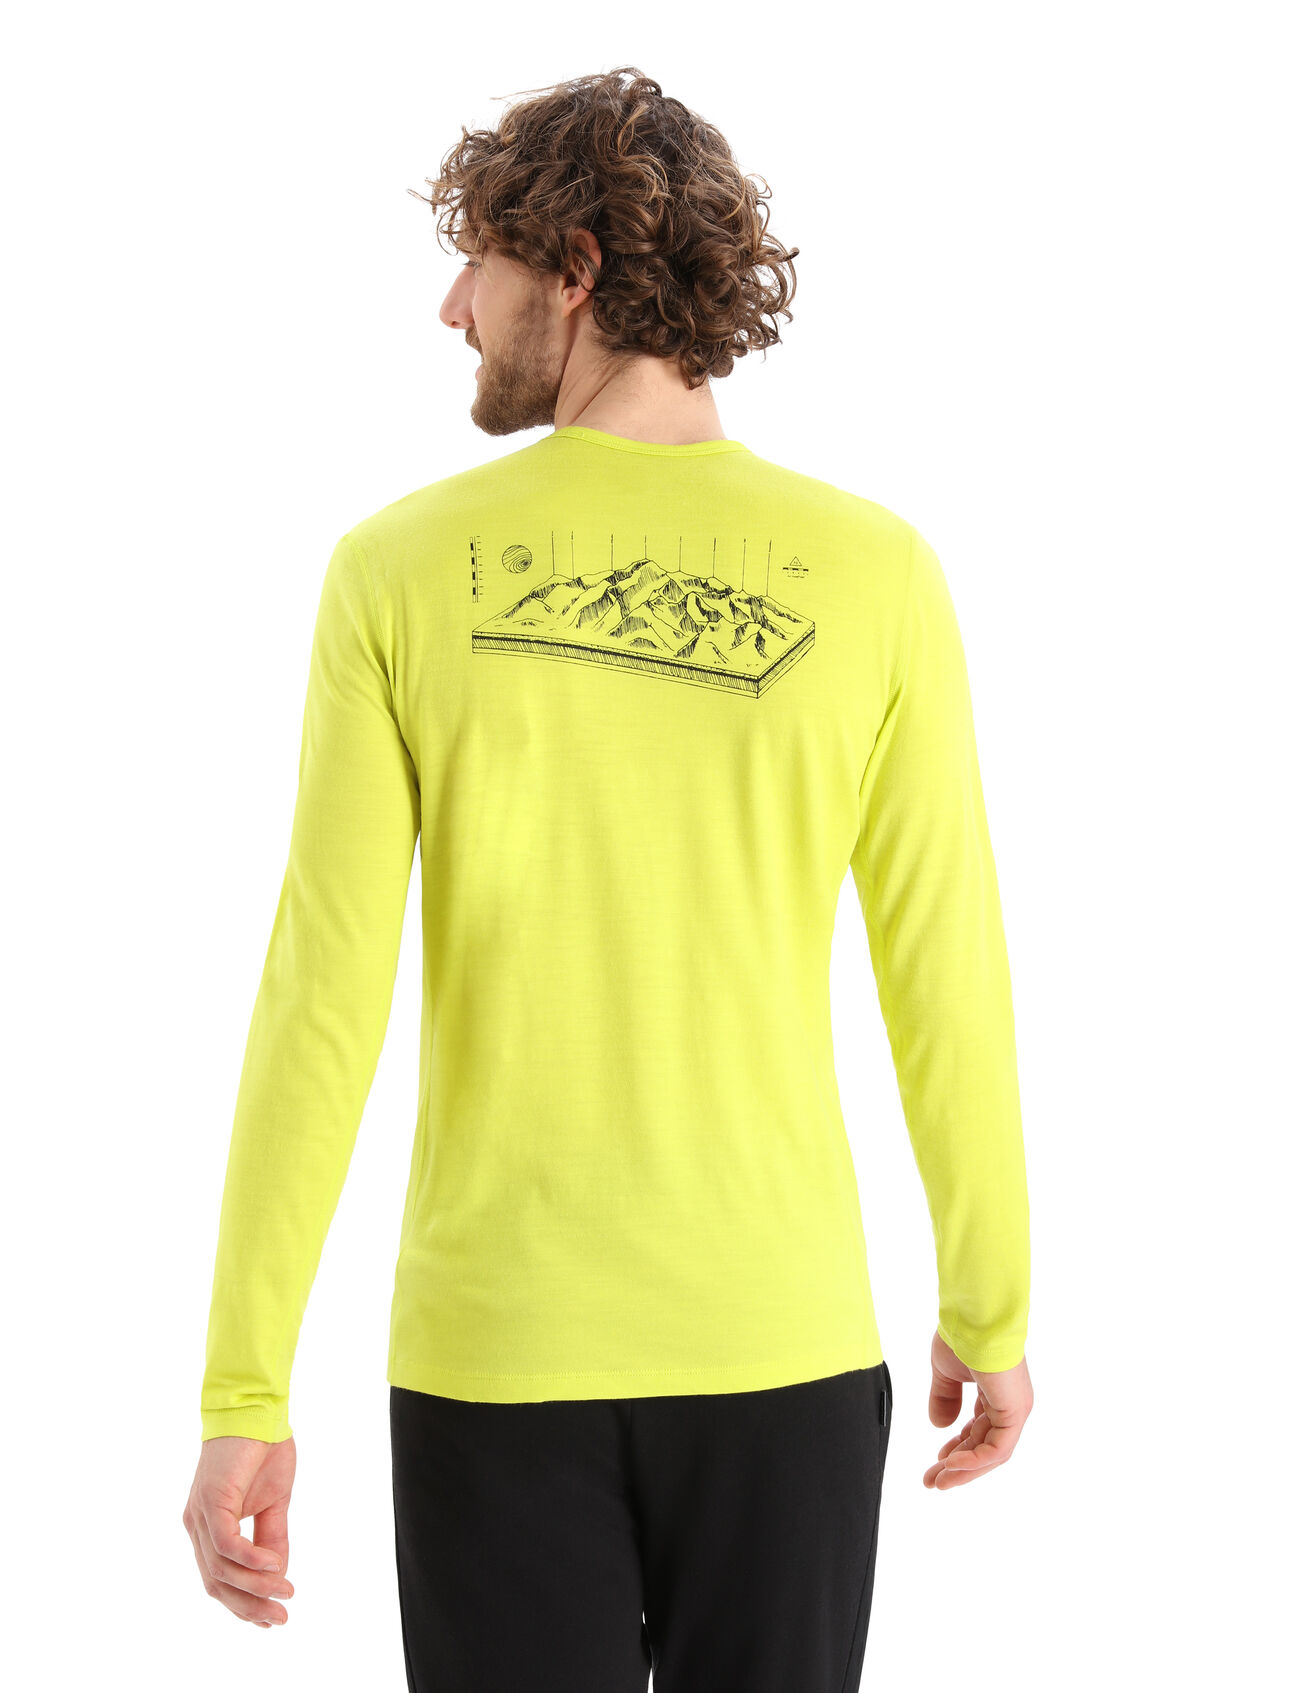 Mens Merino 200 Oasis Long Sleeve Crewe Thermal Top Alps 3D The benchmark against which all others are judged, the 200 Oasis Long Sleeve Crewe Alps 3D features our most versatile merino jersey fabric for year-round layering performance across any activity, with a hand-drawn mountain sketch for added style.